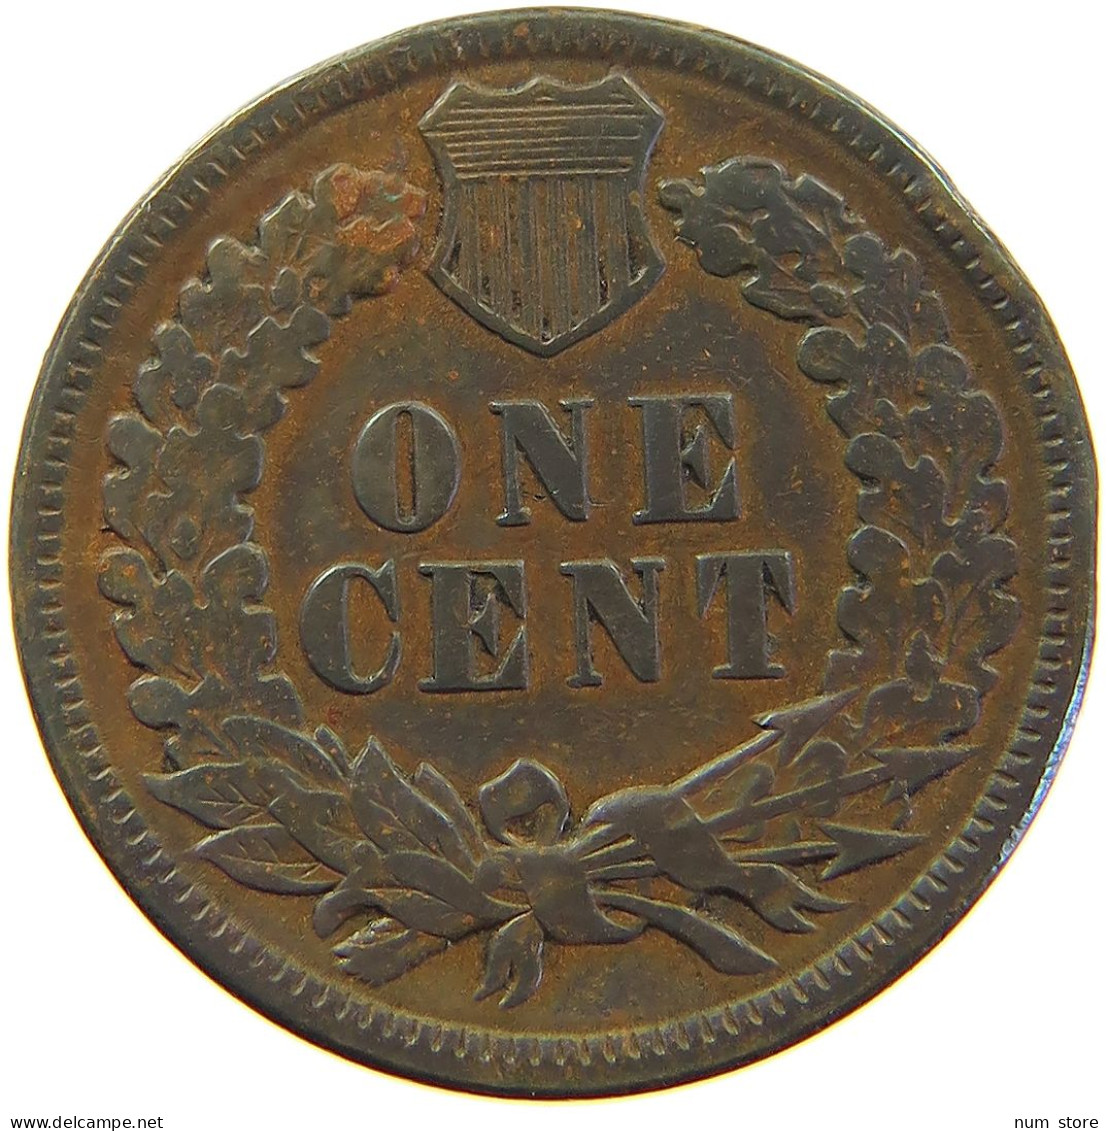 UNITED STATES OF AMERICA CENT 1897 INDIAN HEAD #s024 0159 - 1859-1909: Indian Head